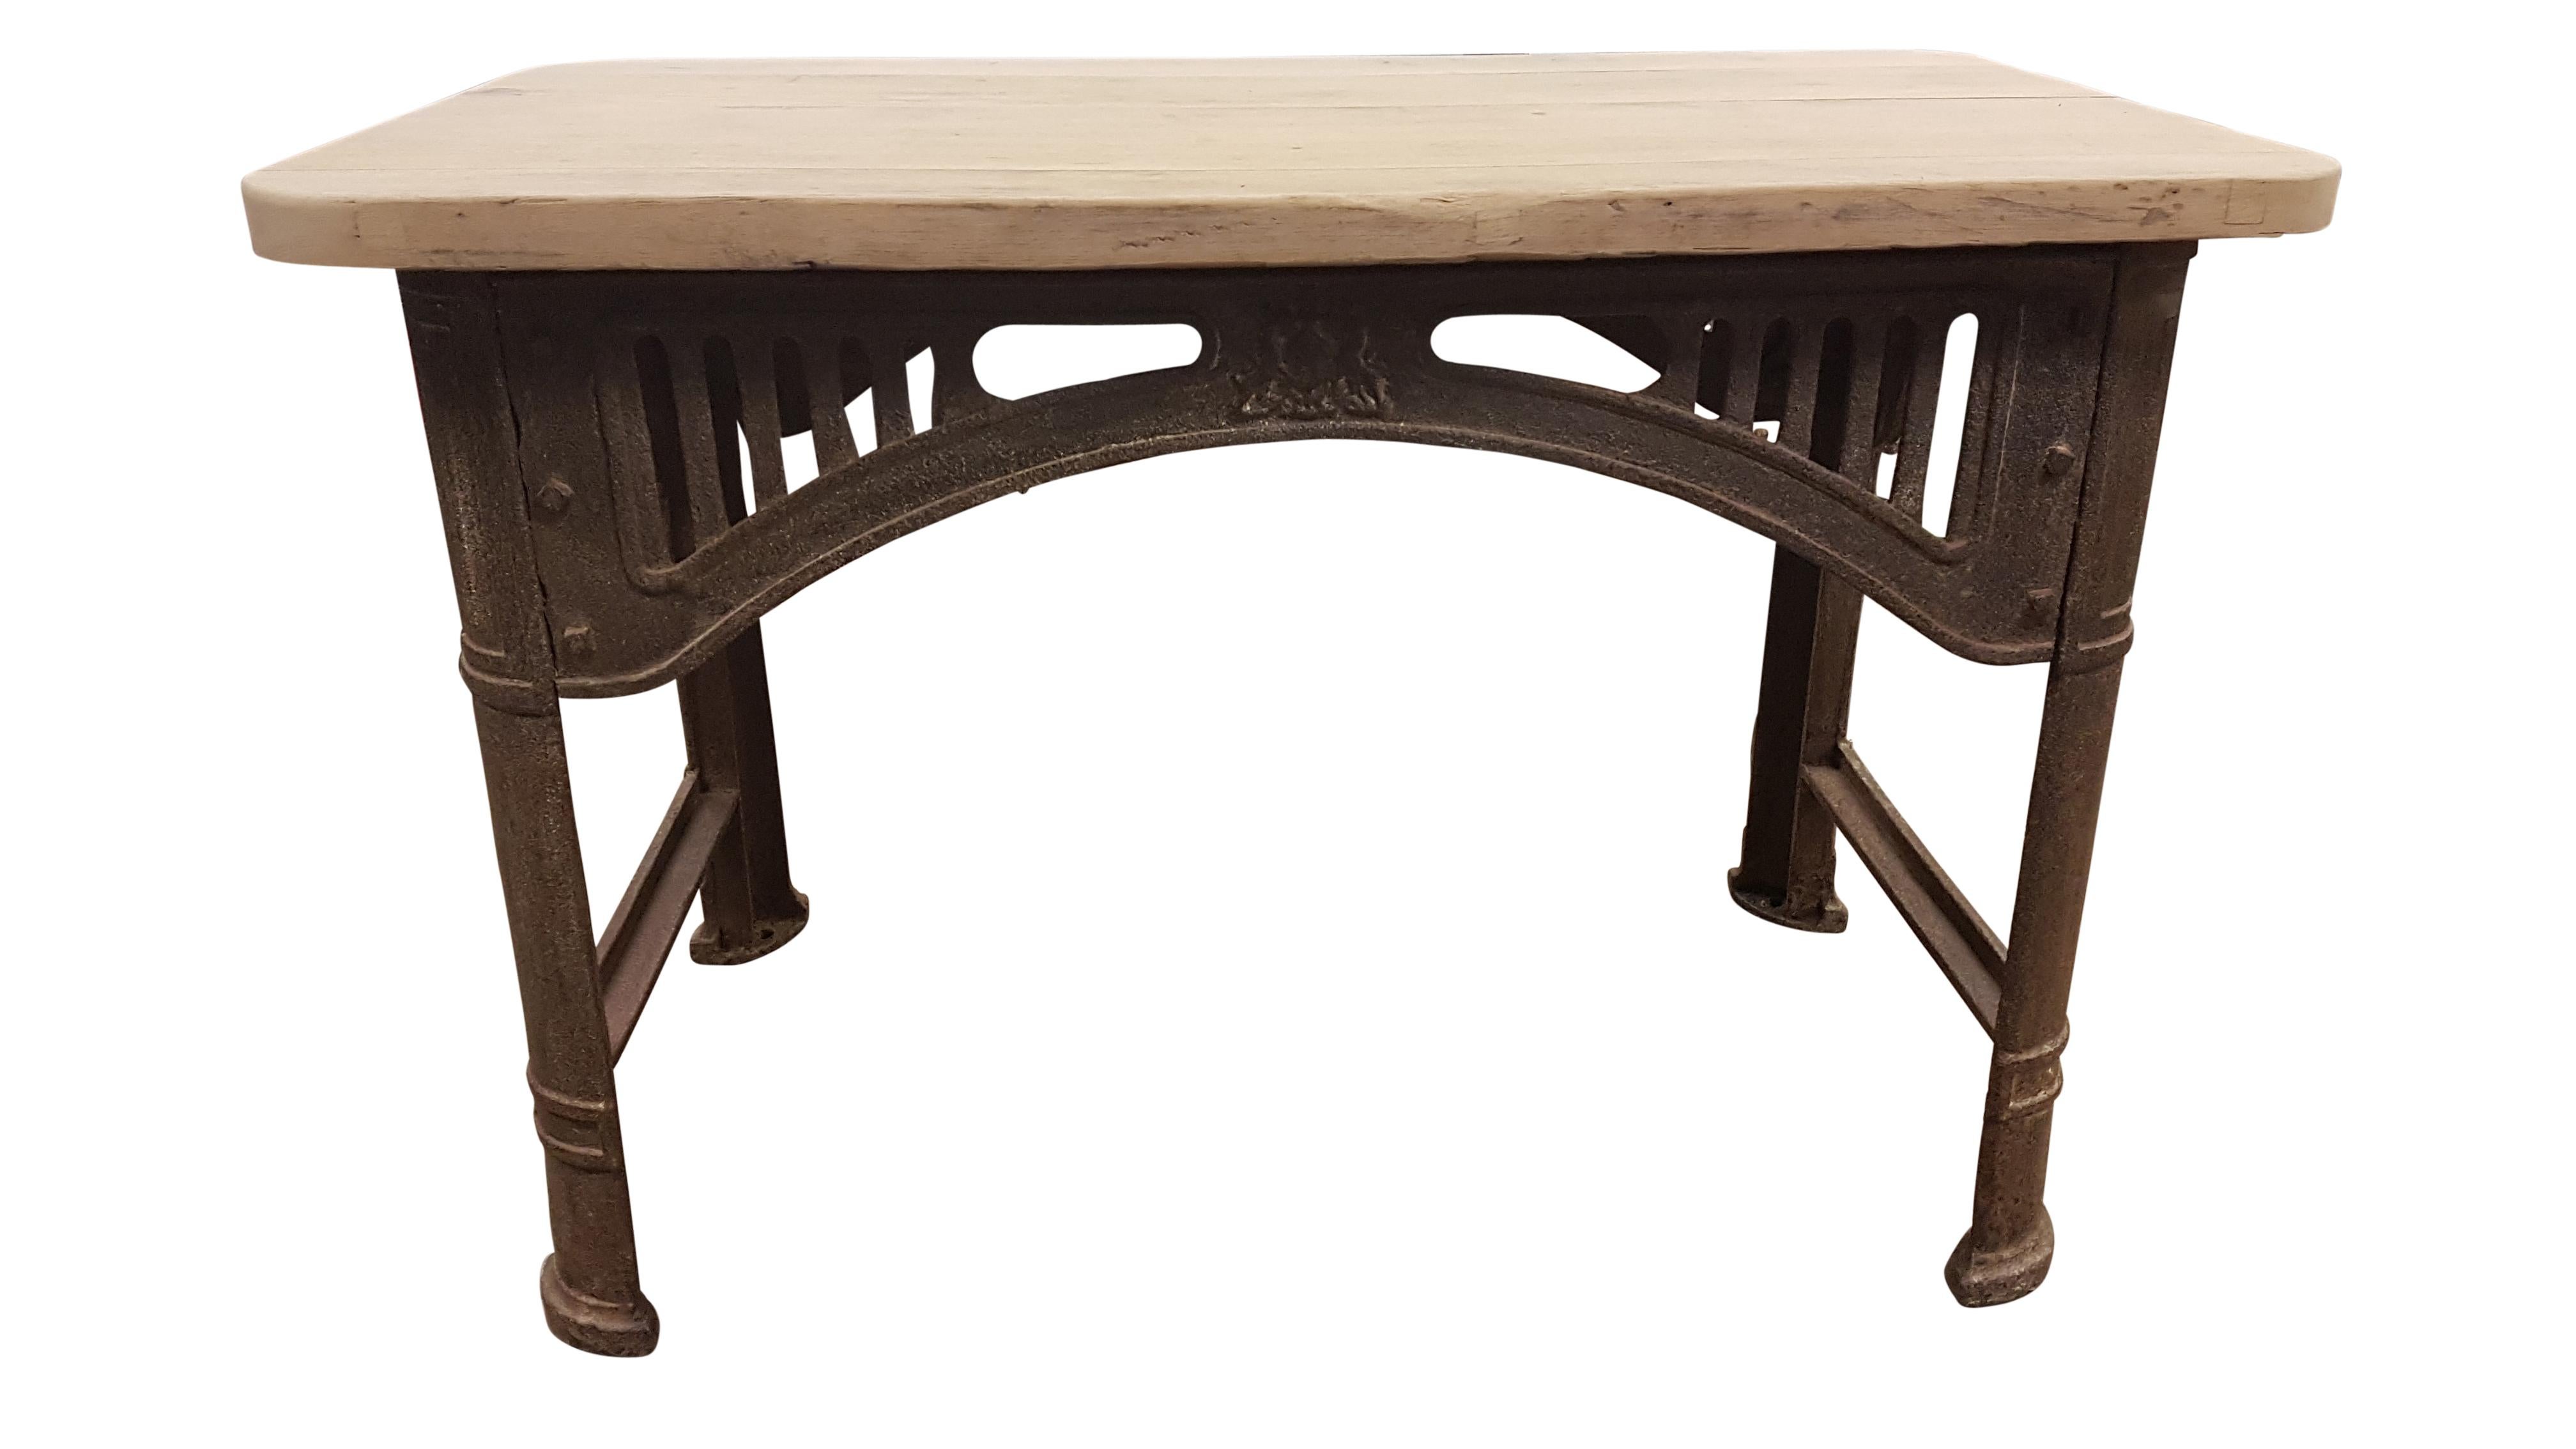 English Industrial Cast Iron Table with Royal Coat of Arms for the United Kingdom For Sale